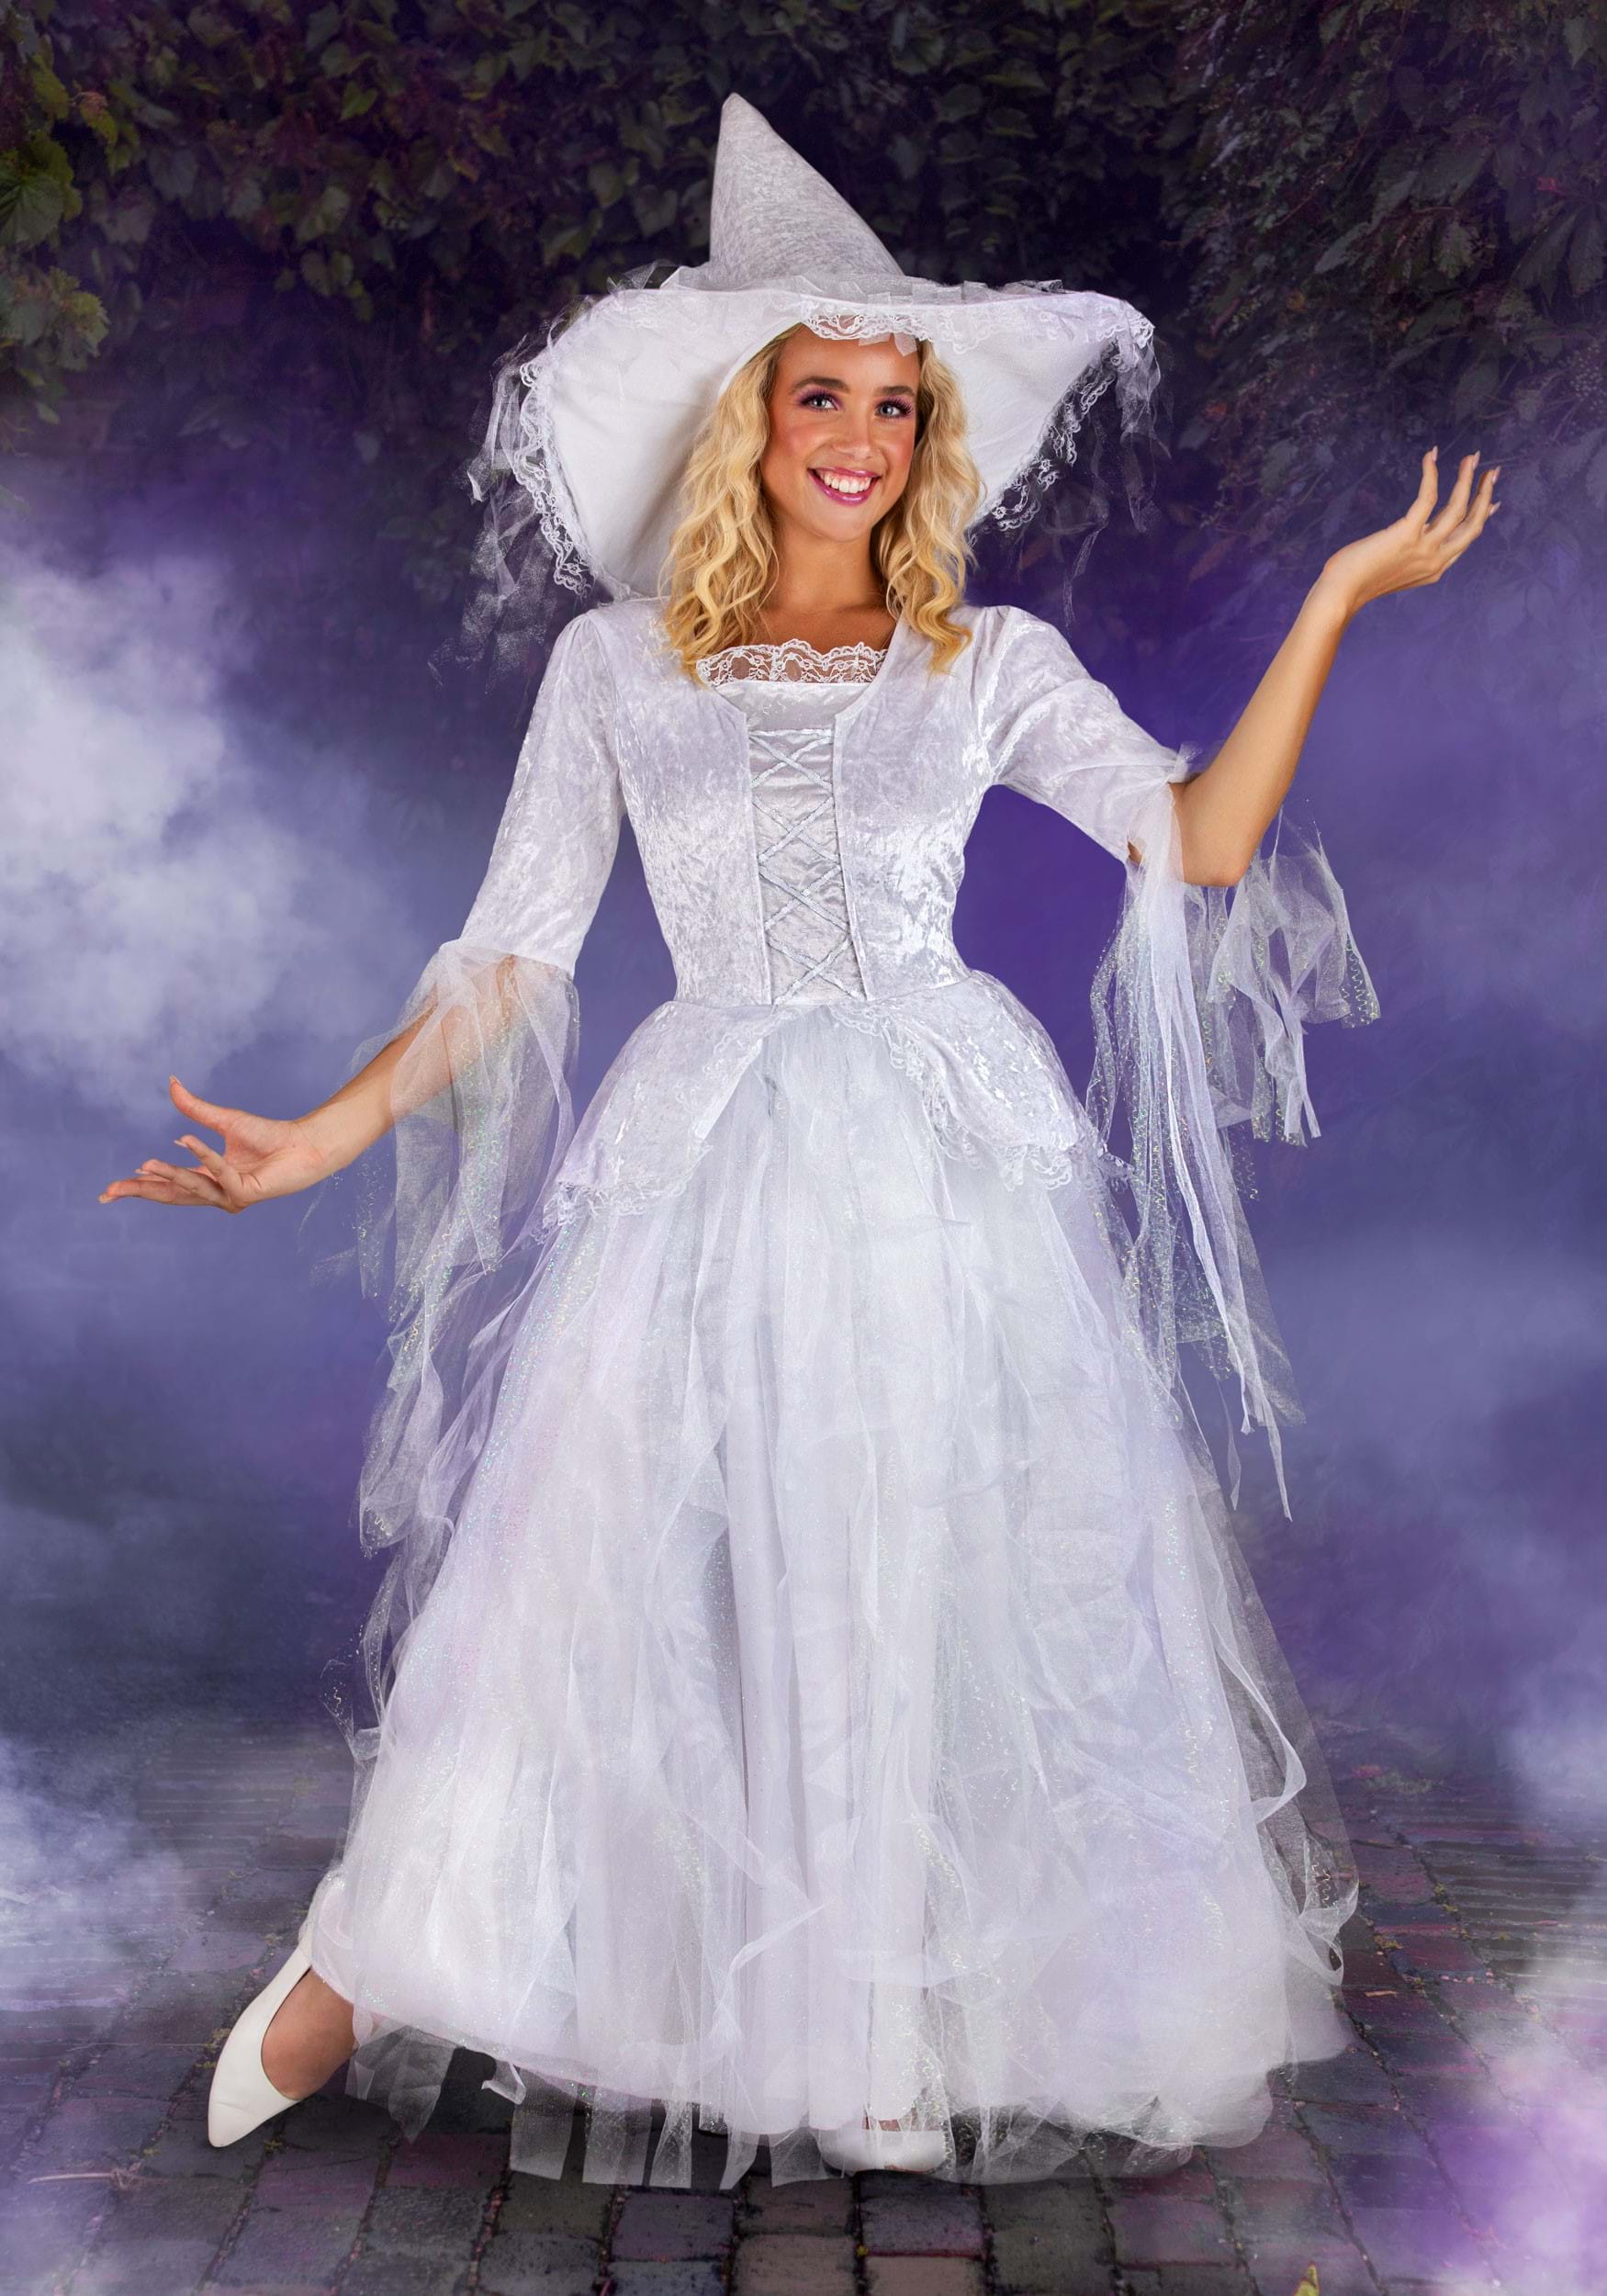 https://images.halloweencostumes.ca/products/79630/1-1/womens-white-witch-costume-dress.jpg